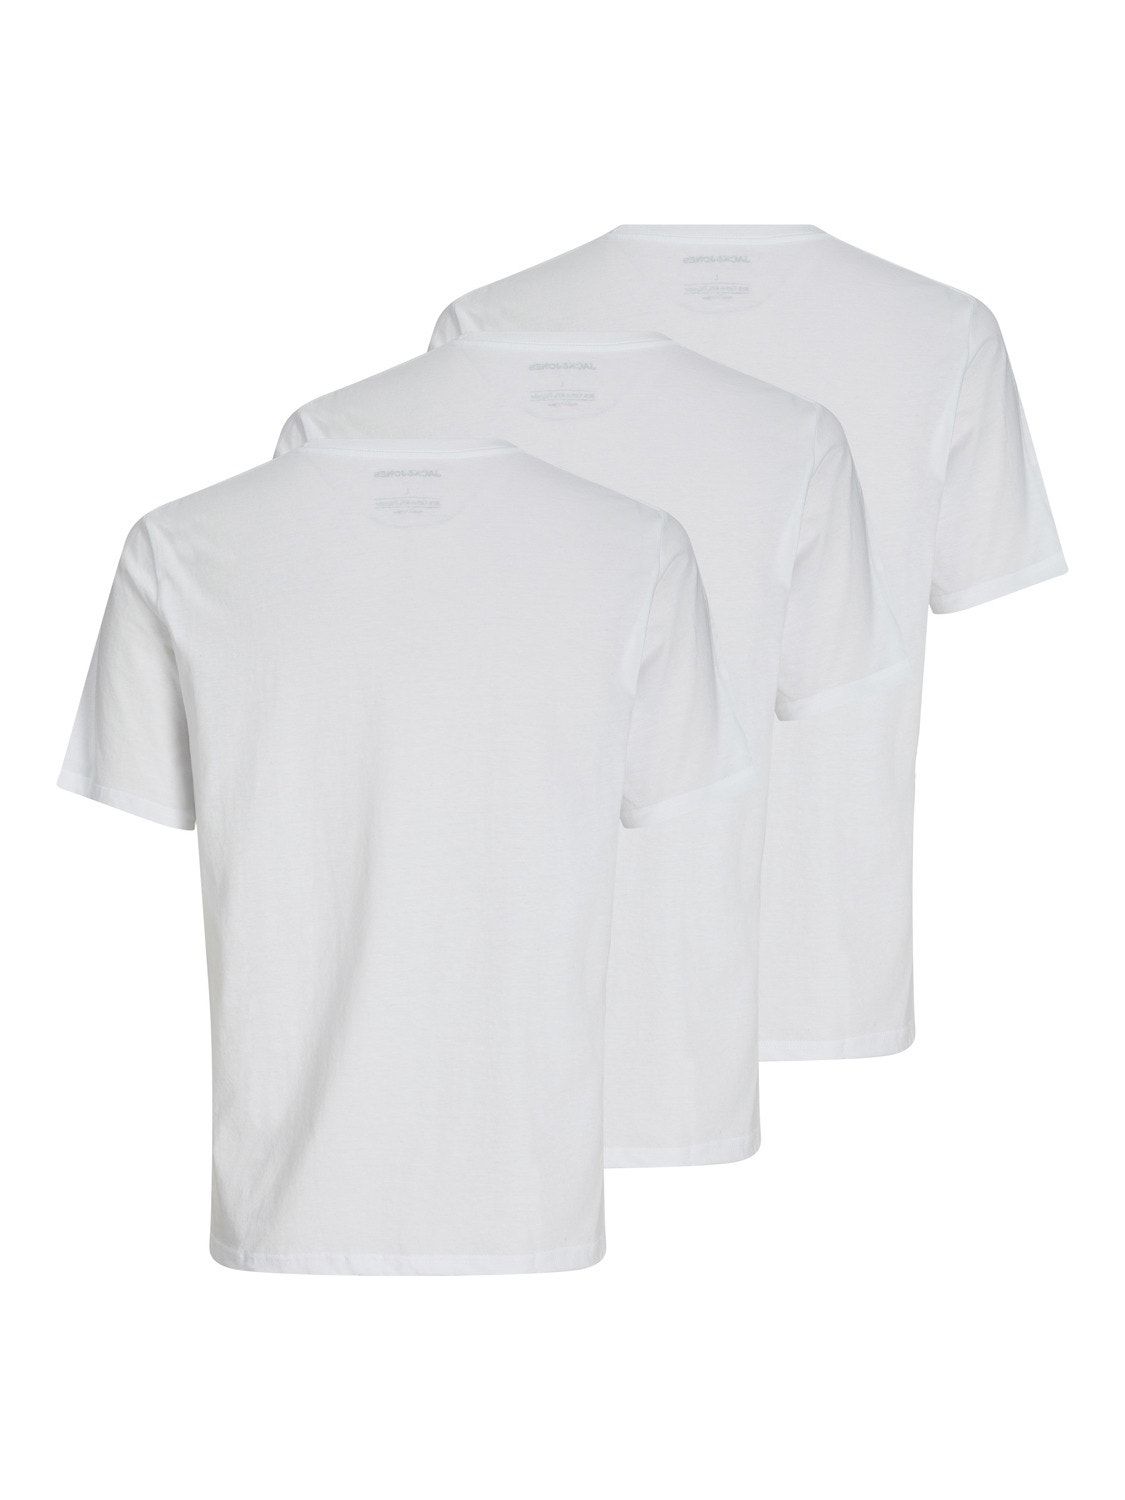 Pack Of 3 - Round Neck Plain T-Shirts